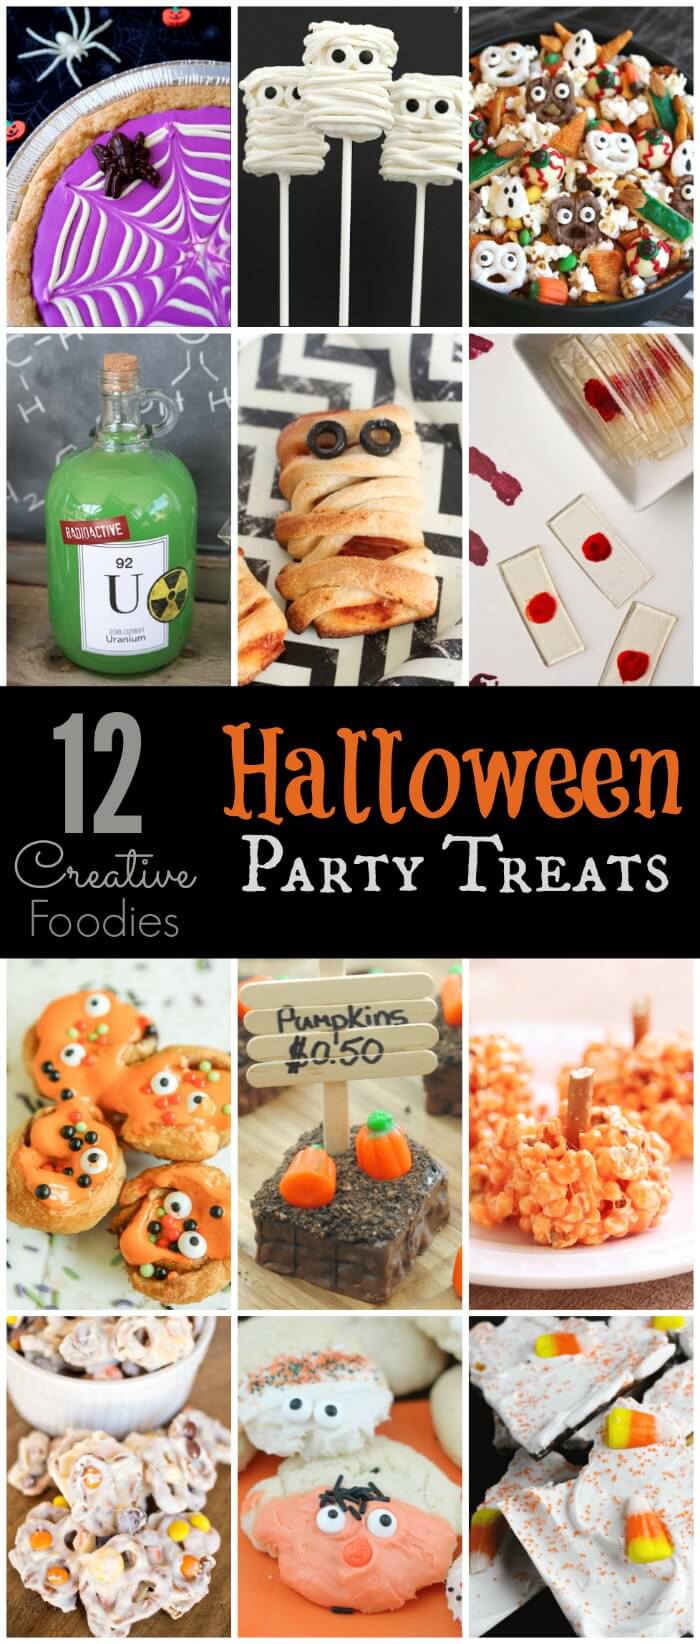 12 halloween party treats from creative foodies